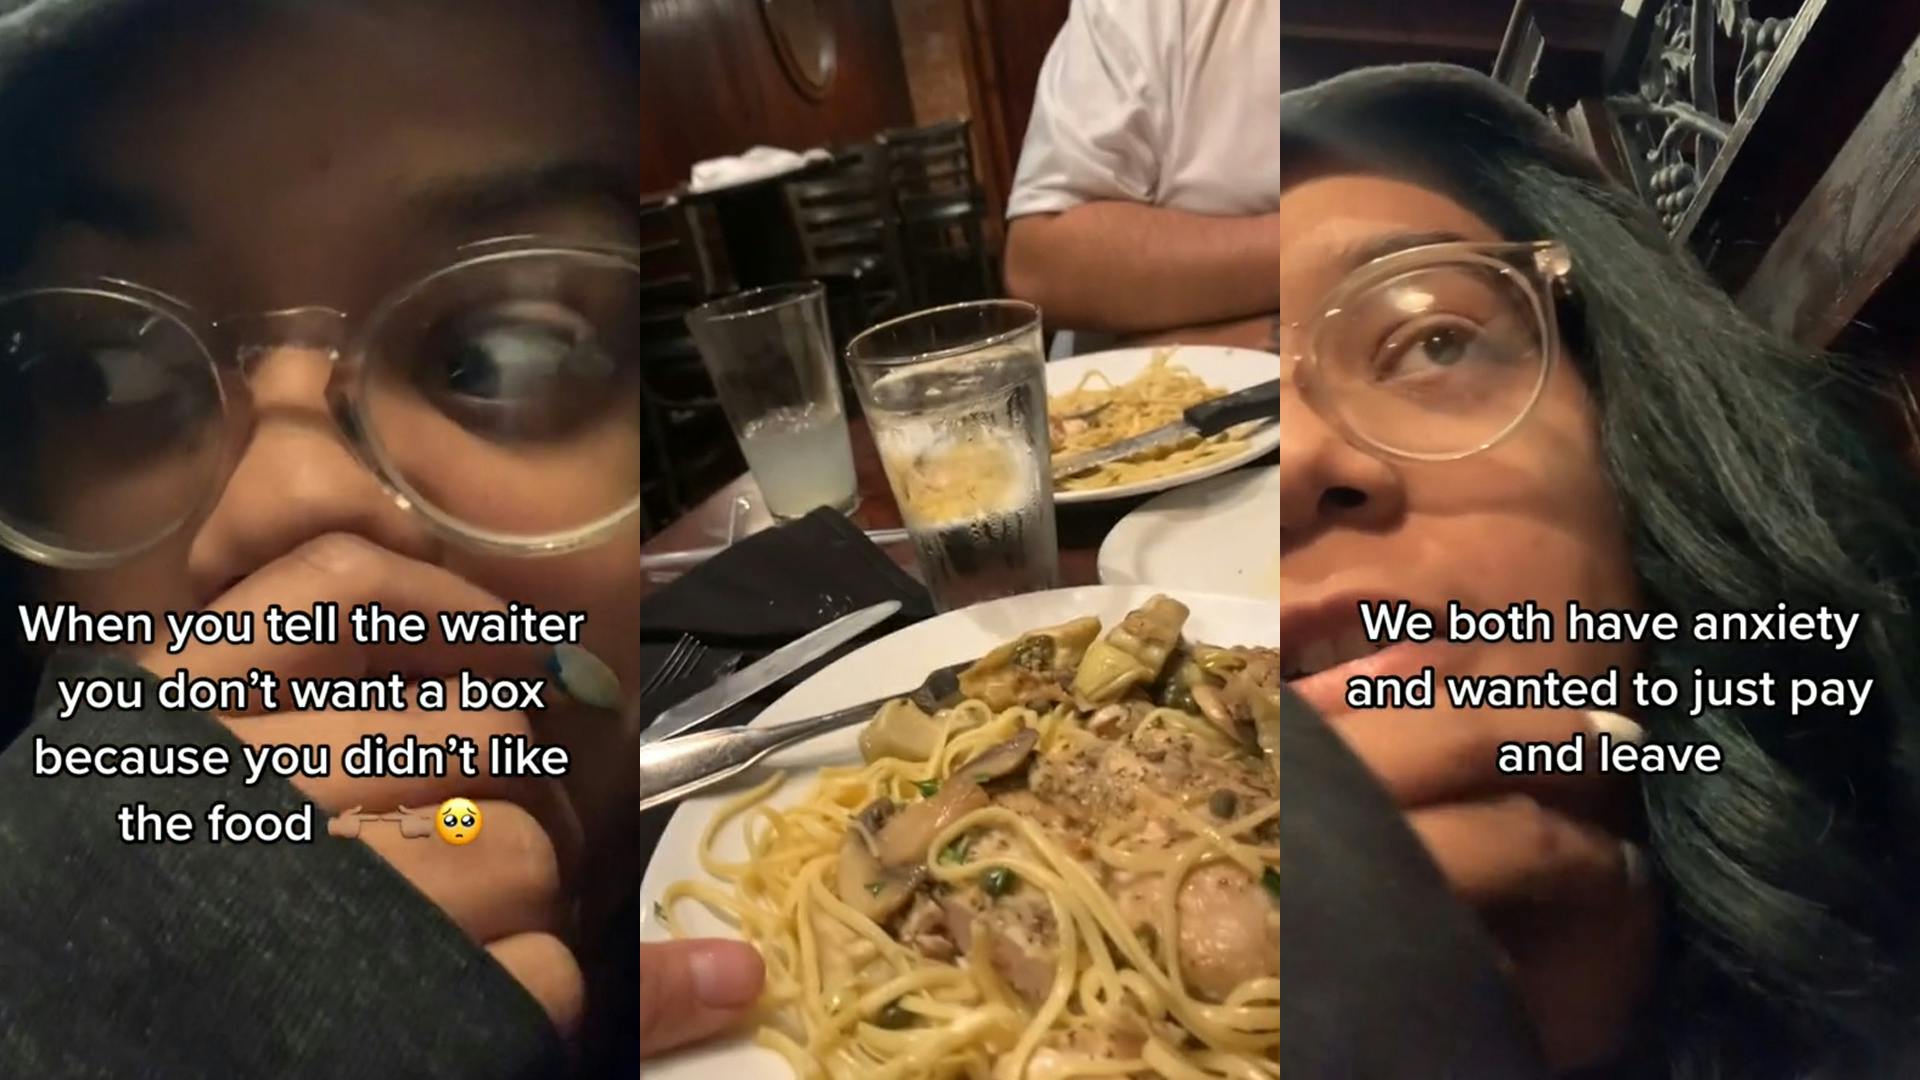 woman with hand on mouth caption "When you tell the waiter you don't want a box because you didn't like the food" (l) Chef grabbing food off of table in restaurant (c) Woman with hand on chin caption "We both have anxiety and wanted to just pay and leave" (r)